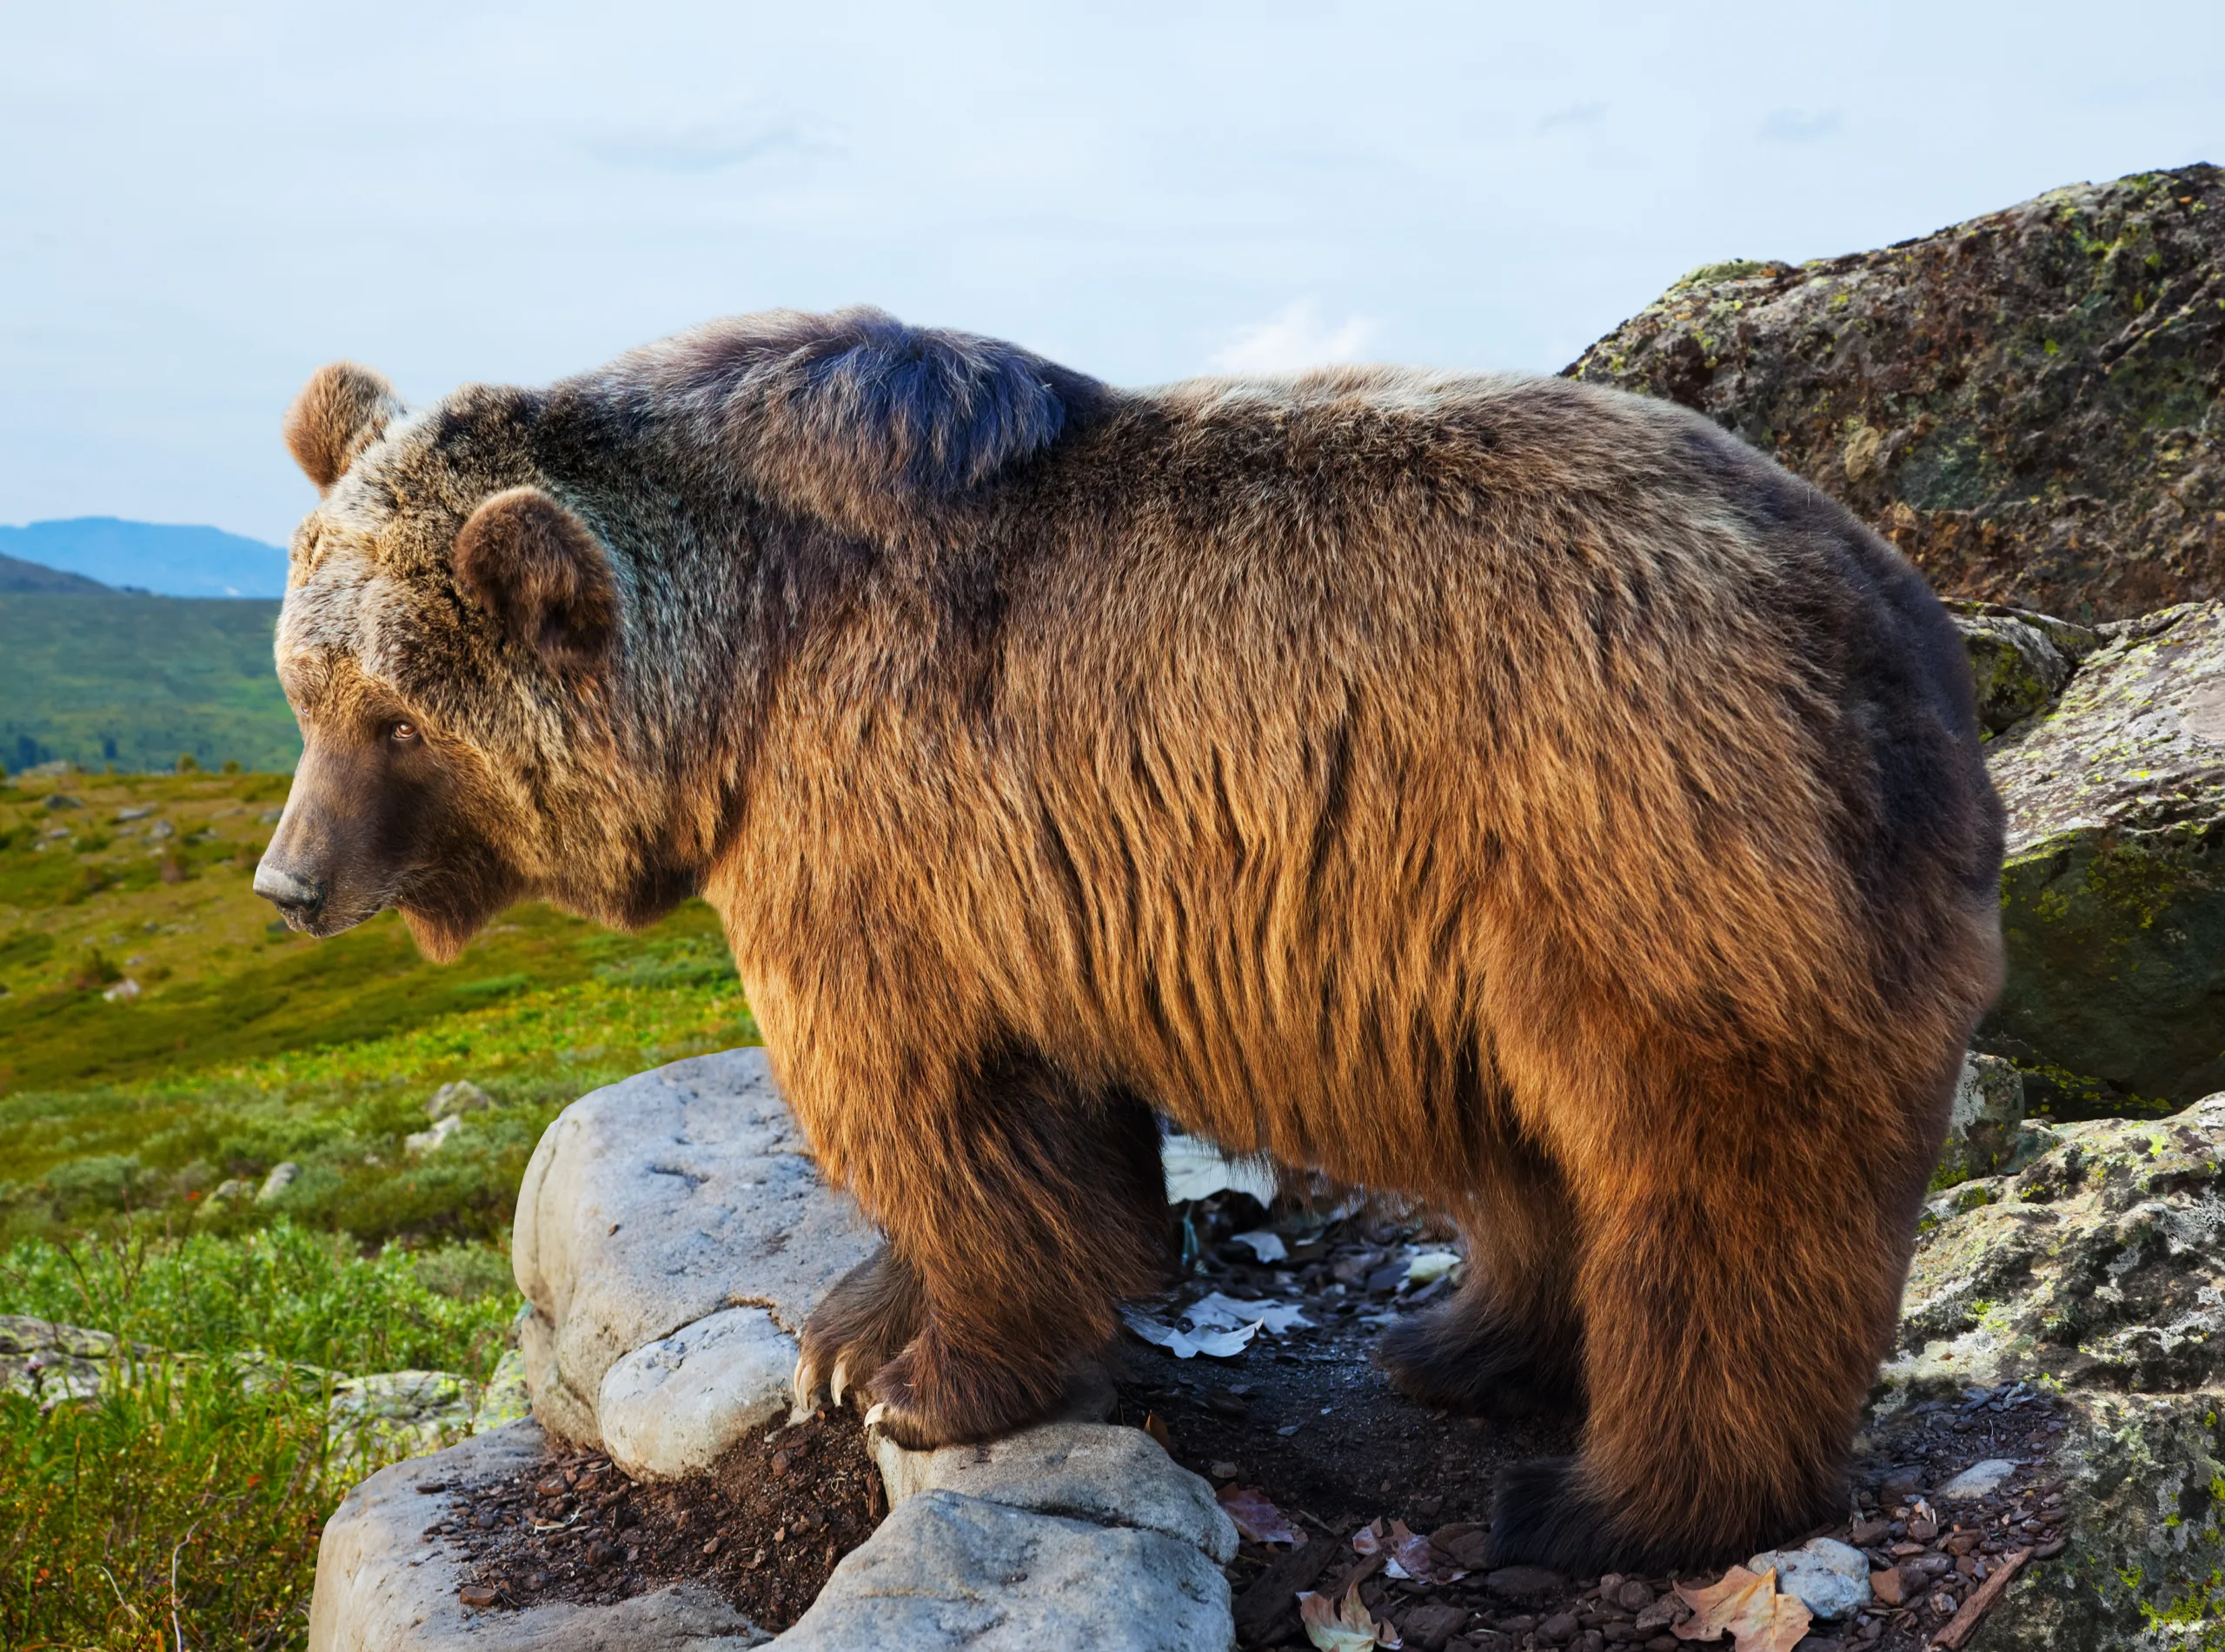 A brown bear standing on the rock in the wild